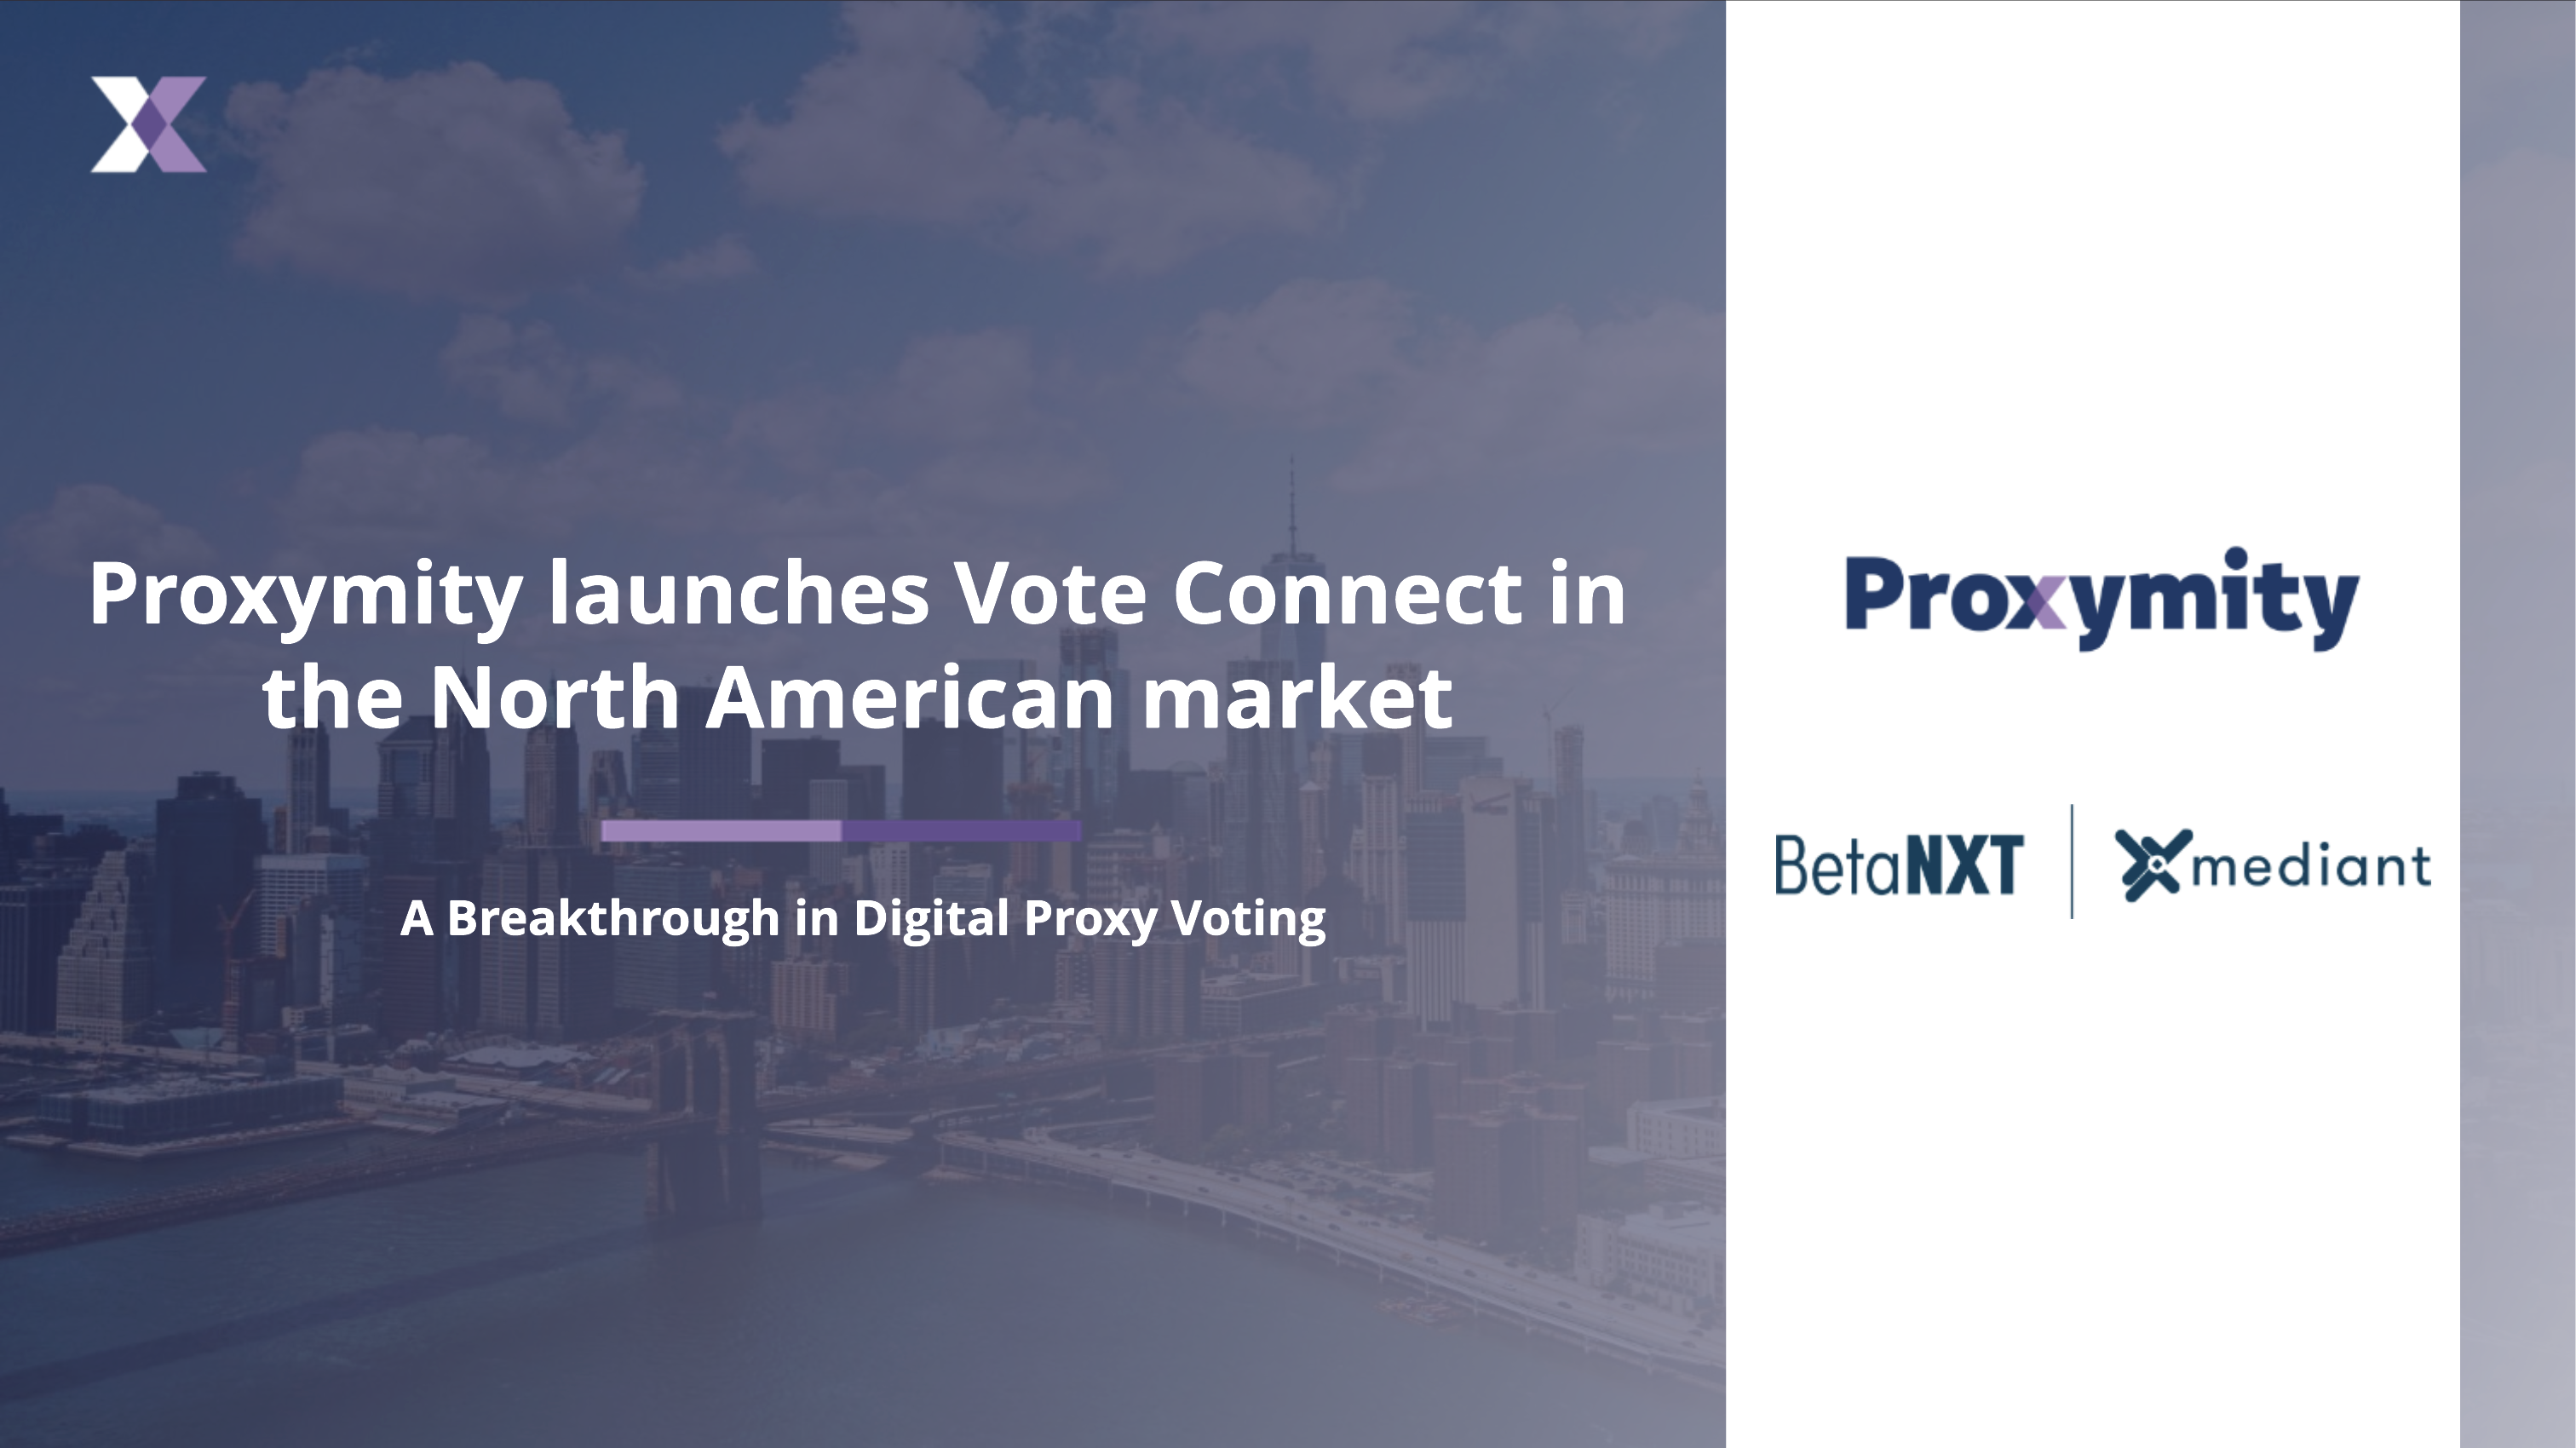 Proxymity launches Vote Connect in the North American market, bringing a breakthrough in digital proxy voting